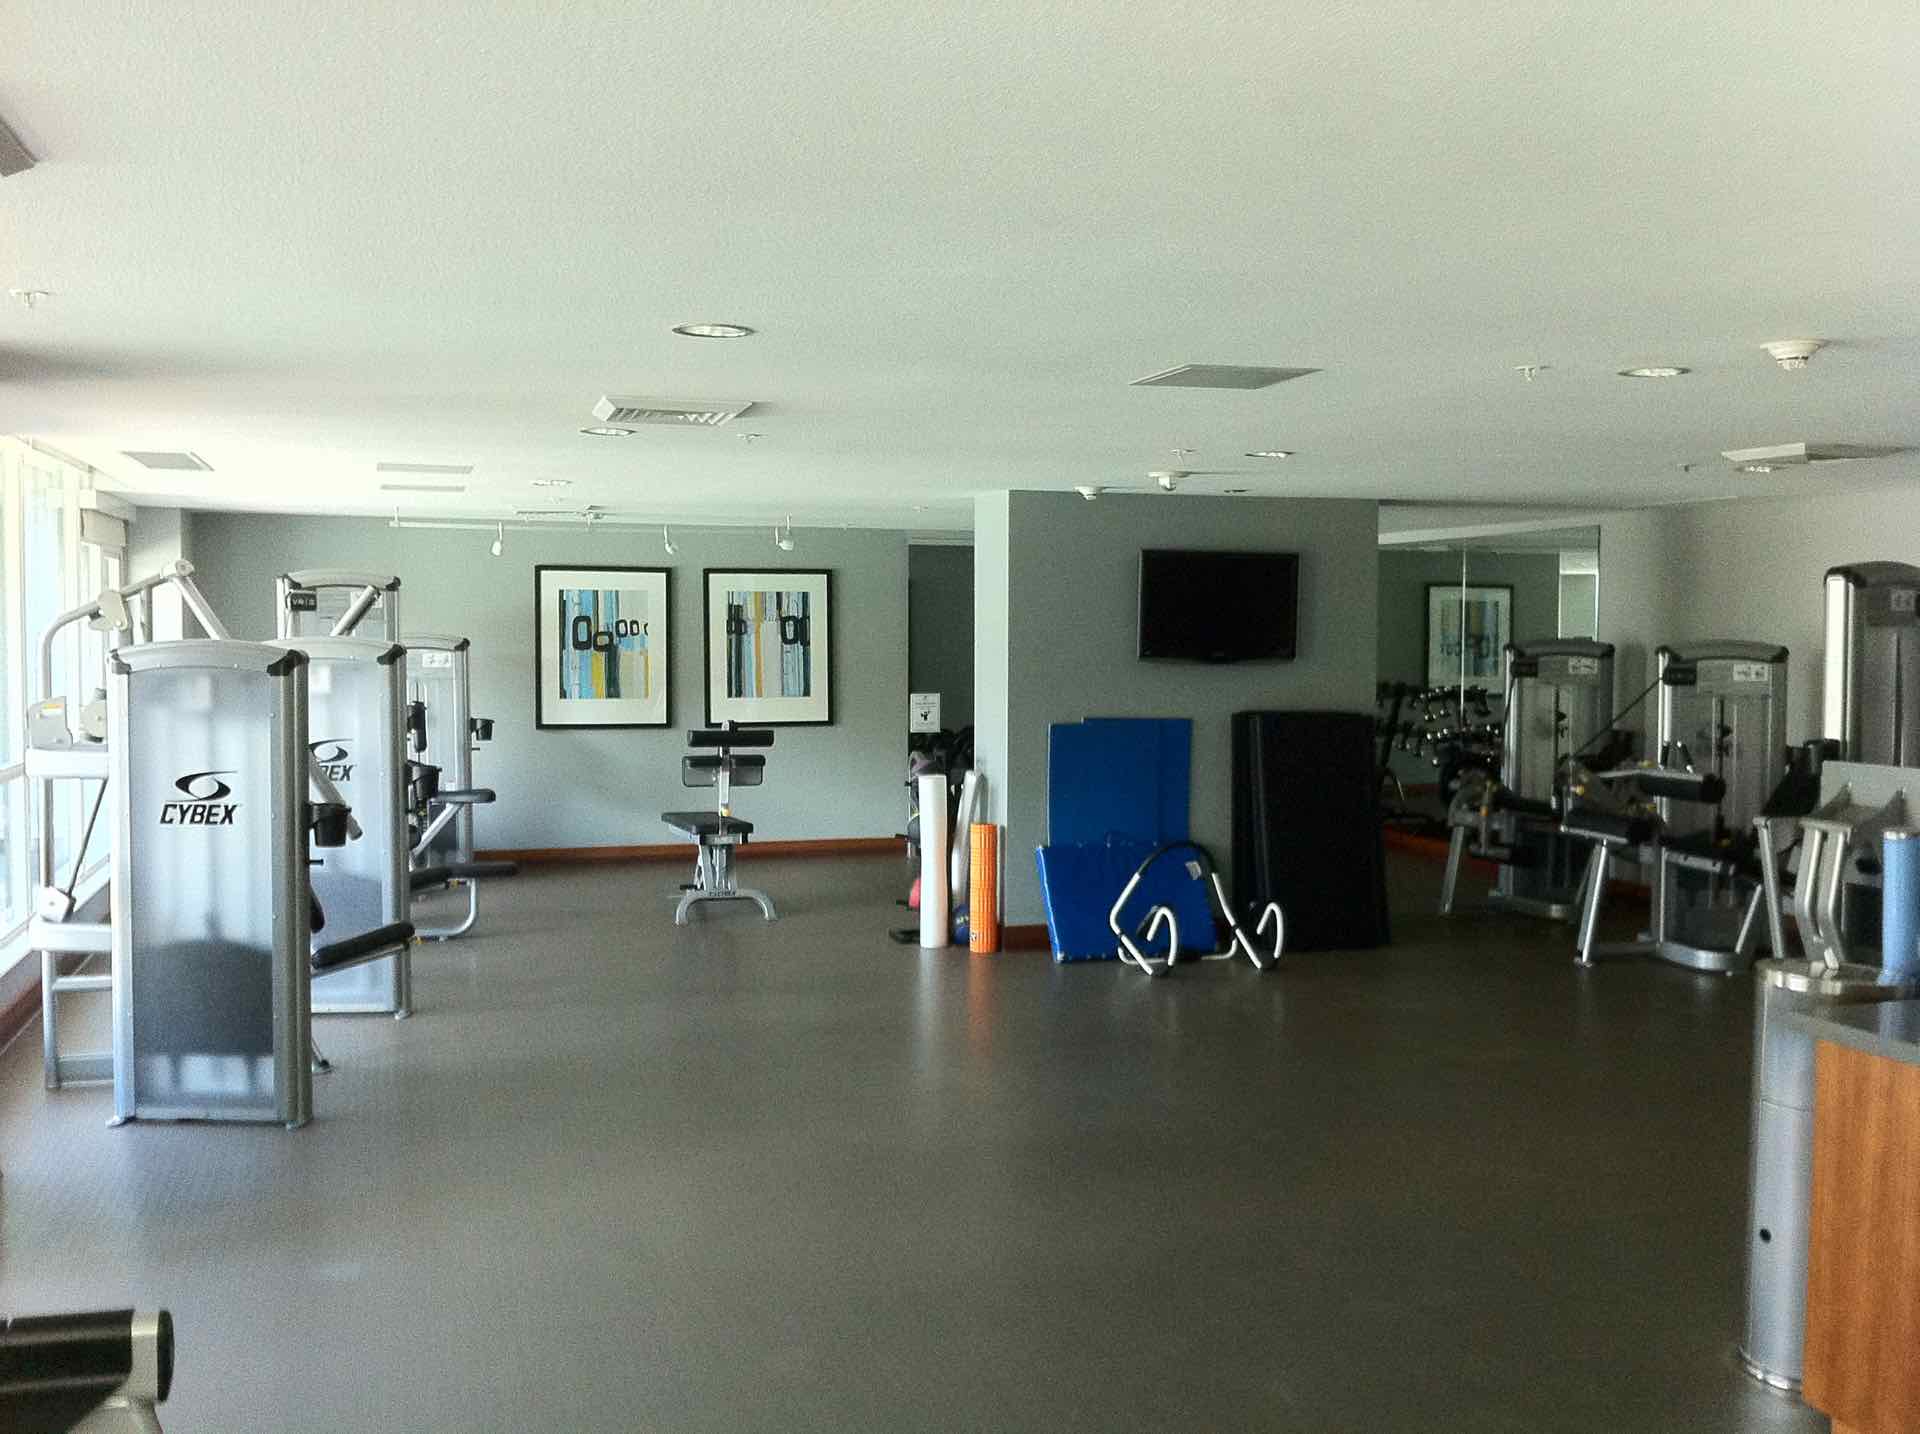 Fitness center with weight training equipment in San Diego gym